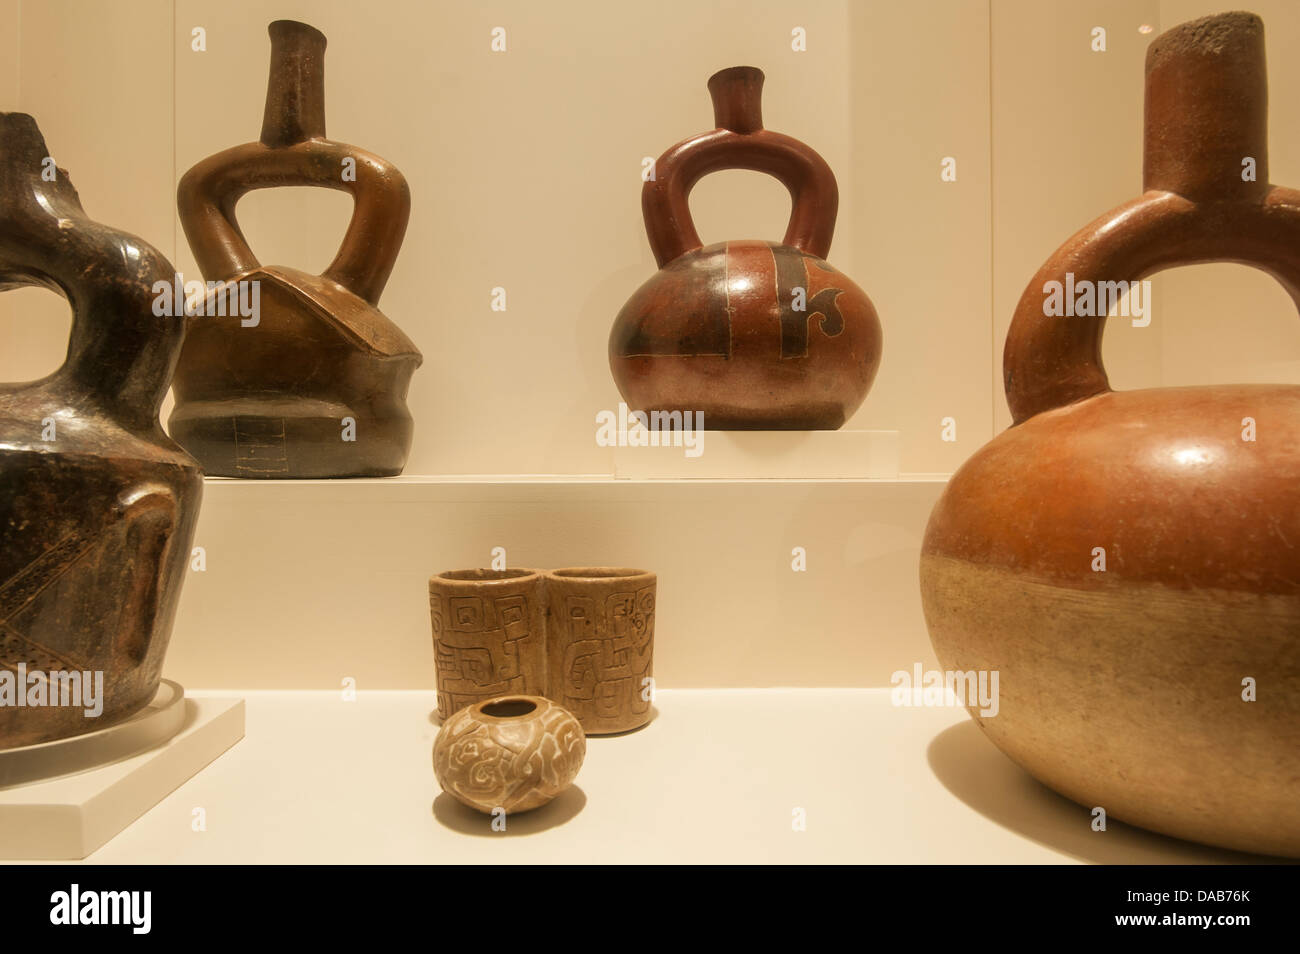 Ancient Pre-Columbian Incan Inca clay pottery vase artifacts archaeological art artwork display in the Larco Museum, Lima, Peru. Stock Photo